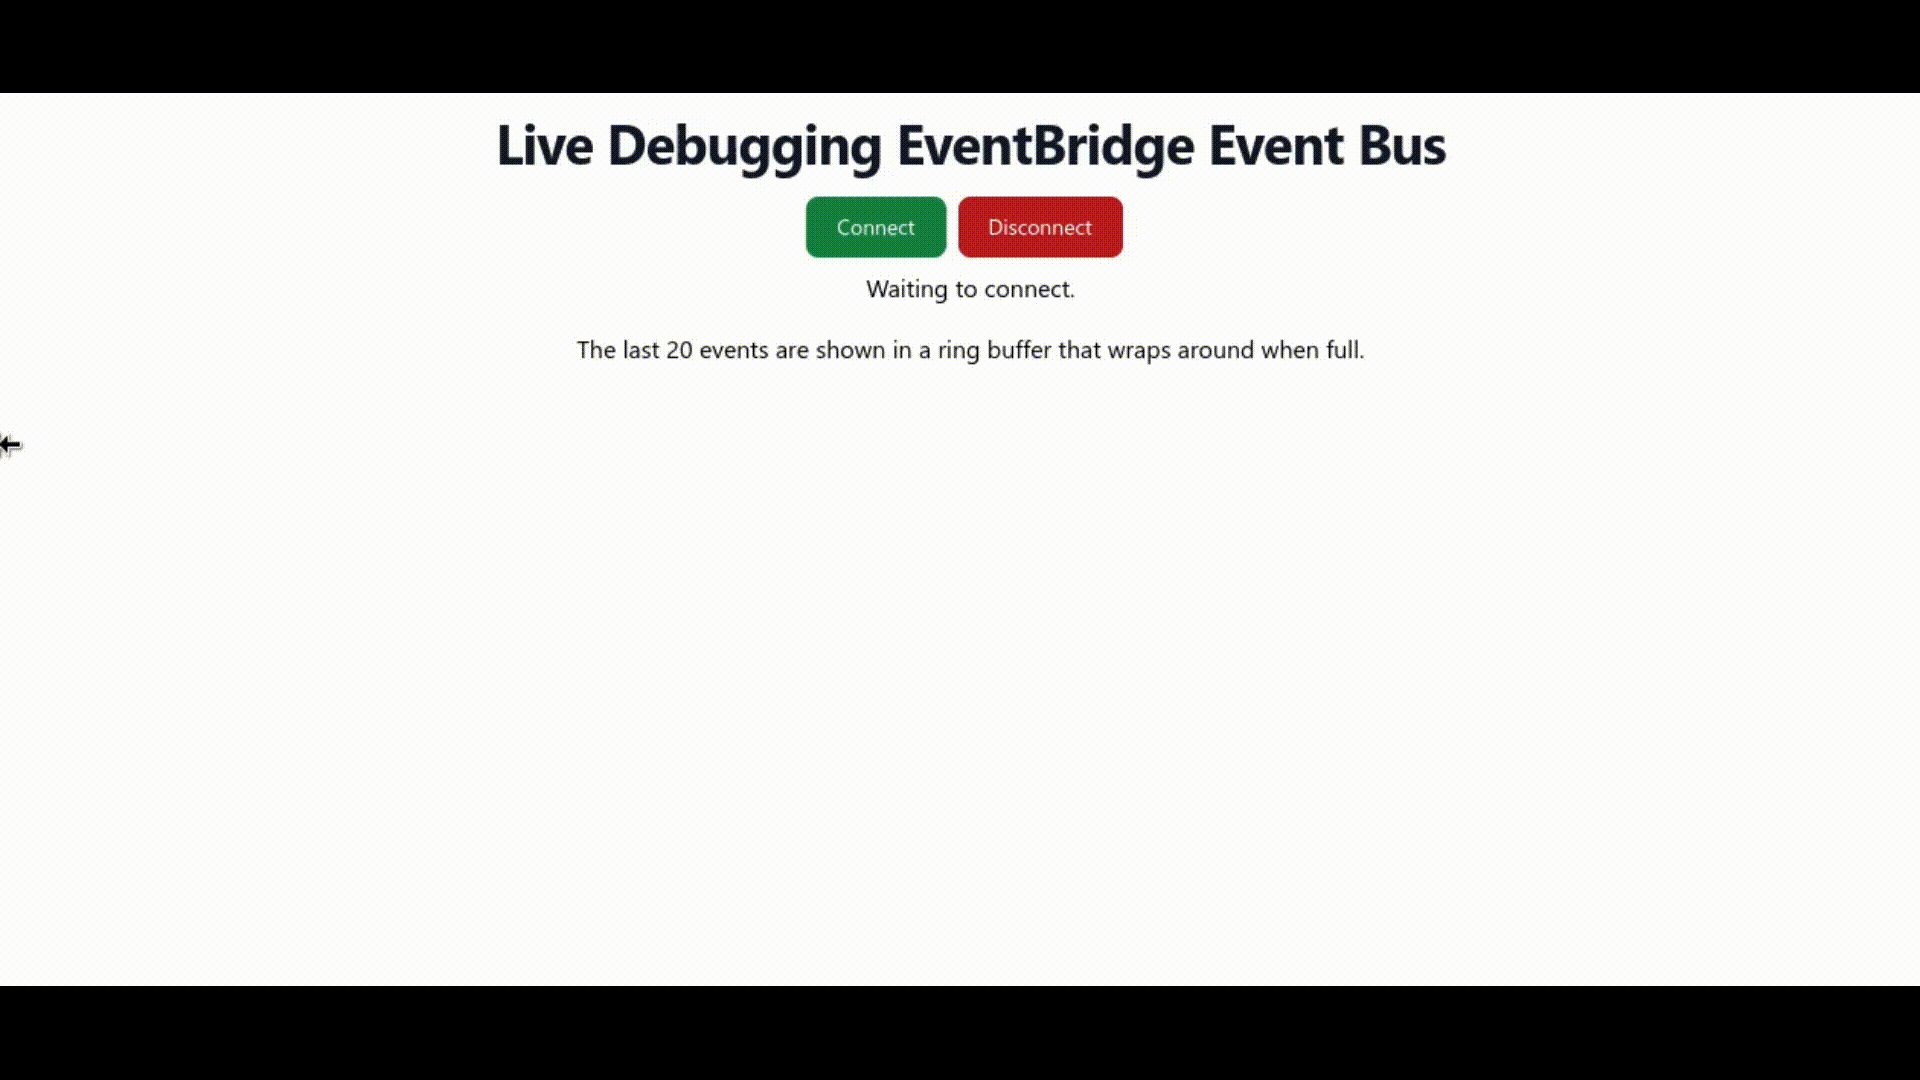 An animation showing events describing products being updated and created arriving on an Event Bus.